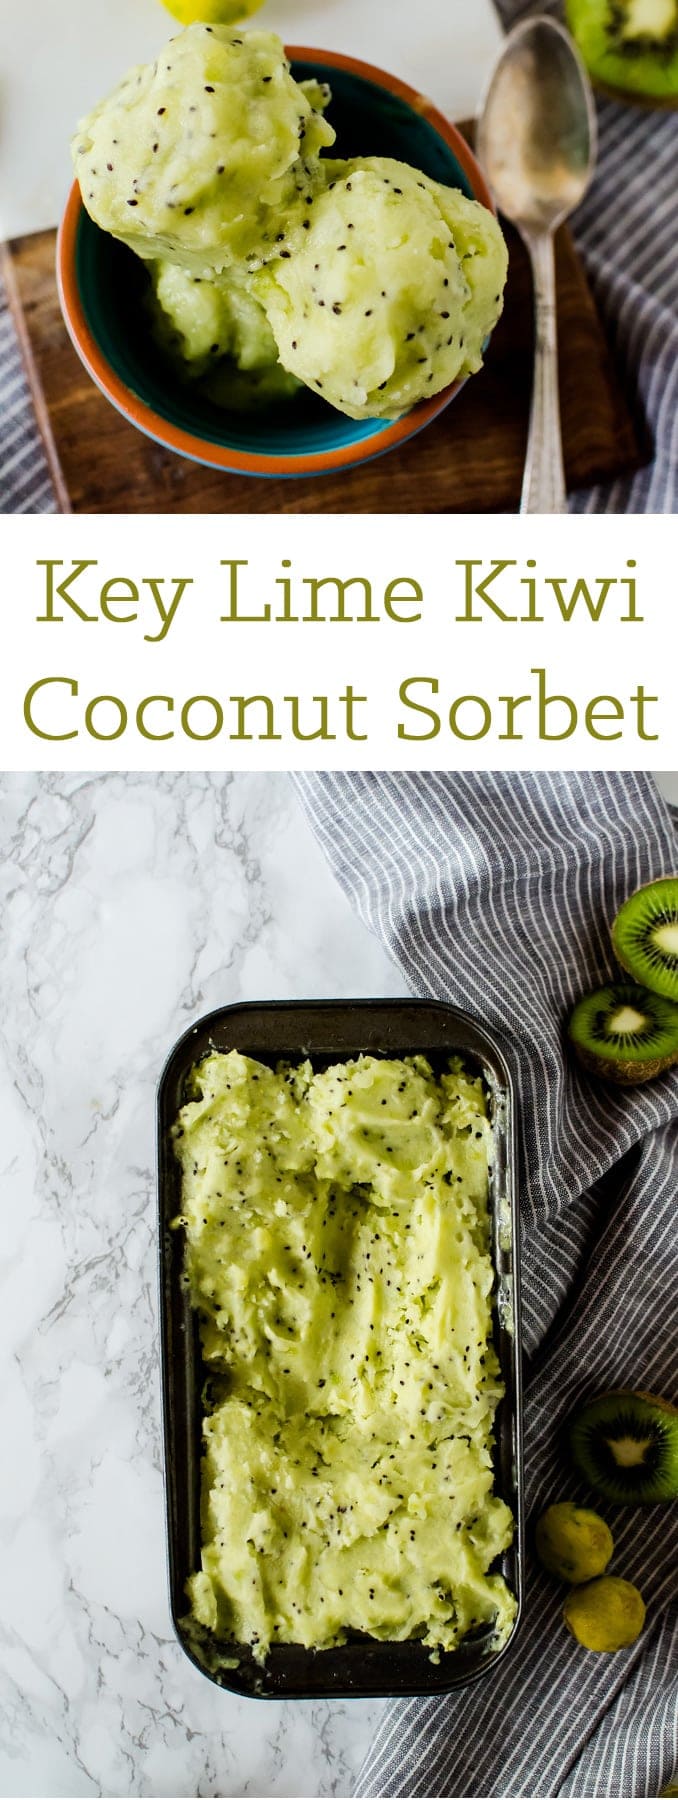 This tropical kiwi sorbet is infused with key lime and coconut for an incredible summer dessert you will not be able to put down.